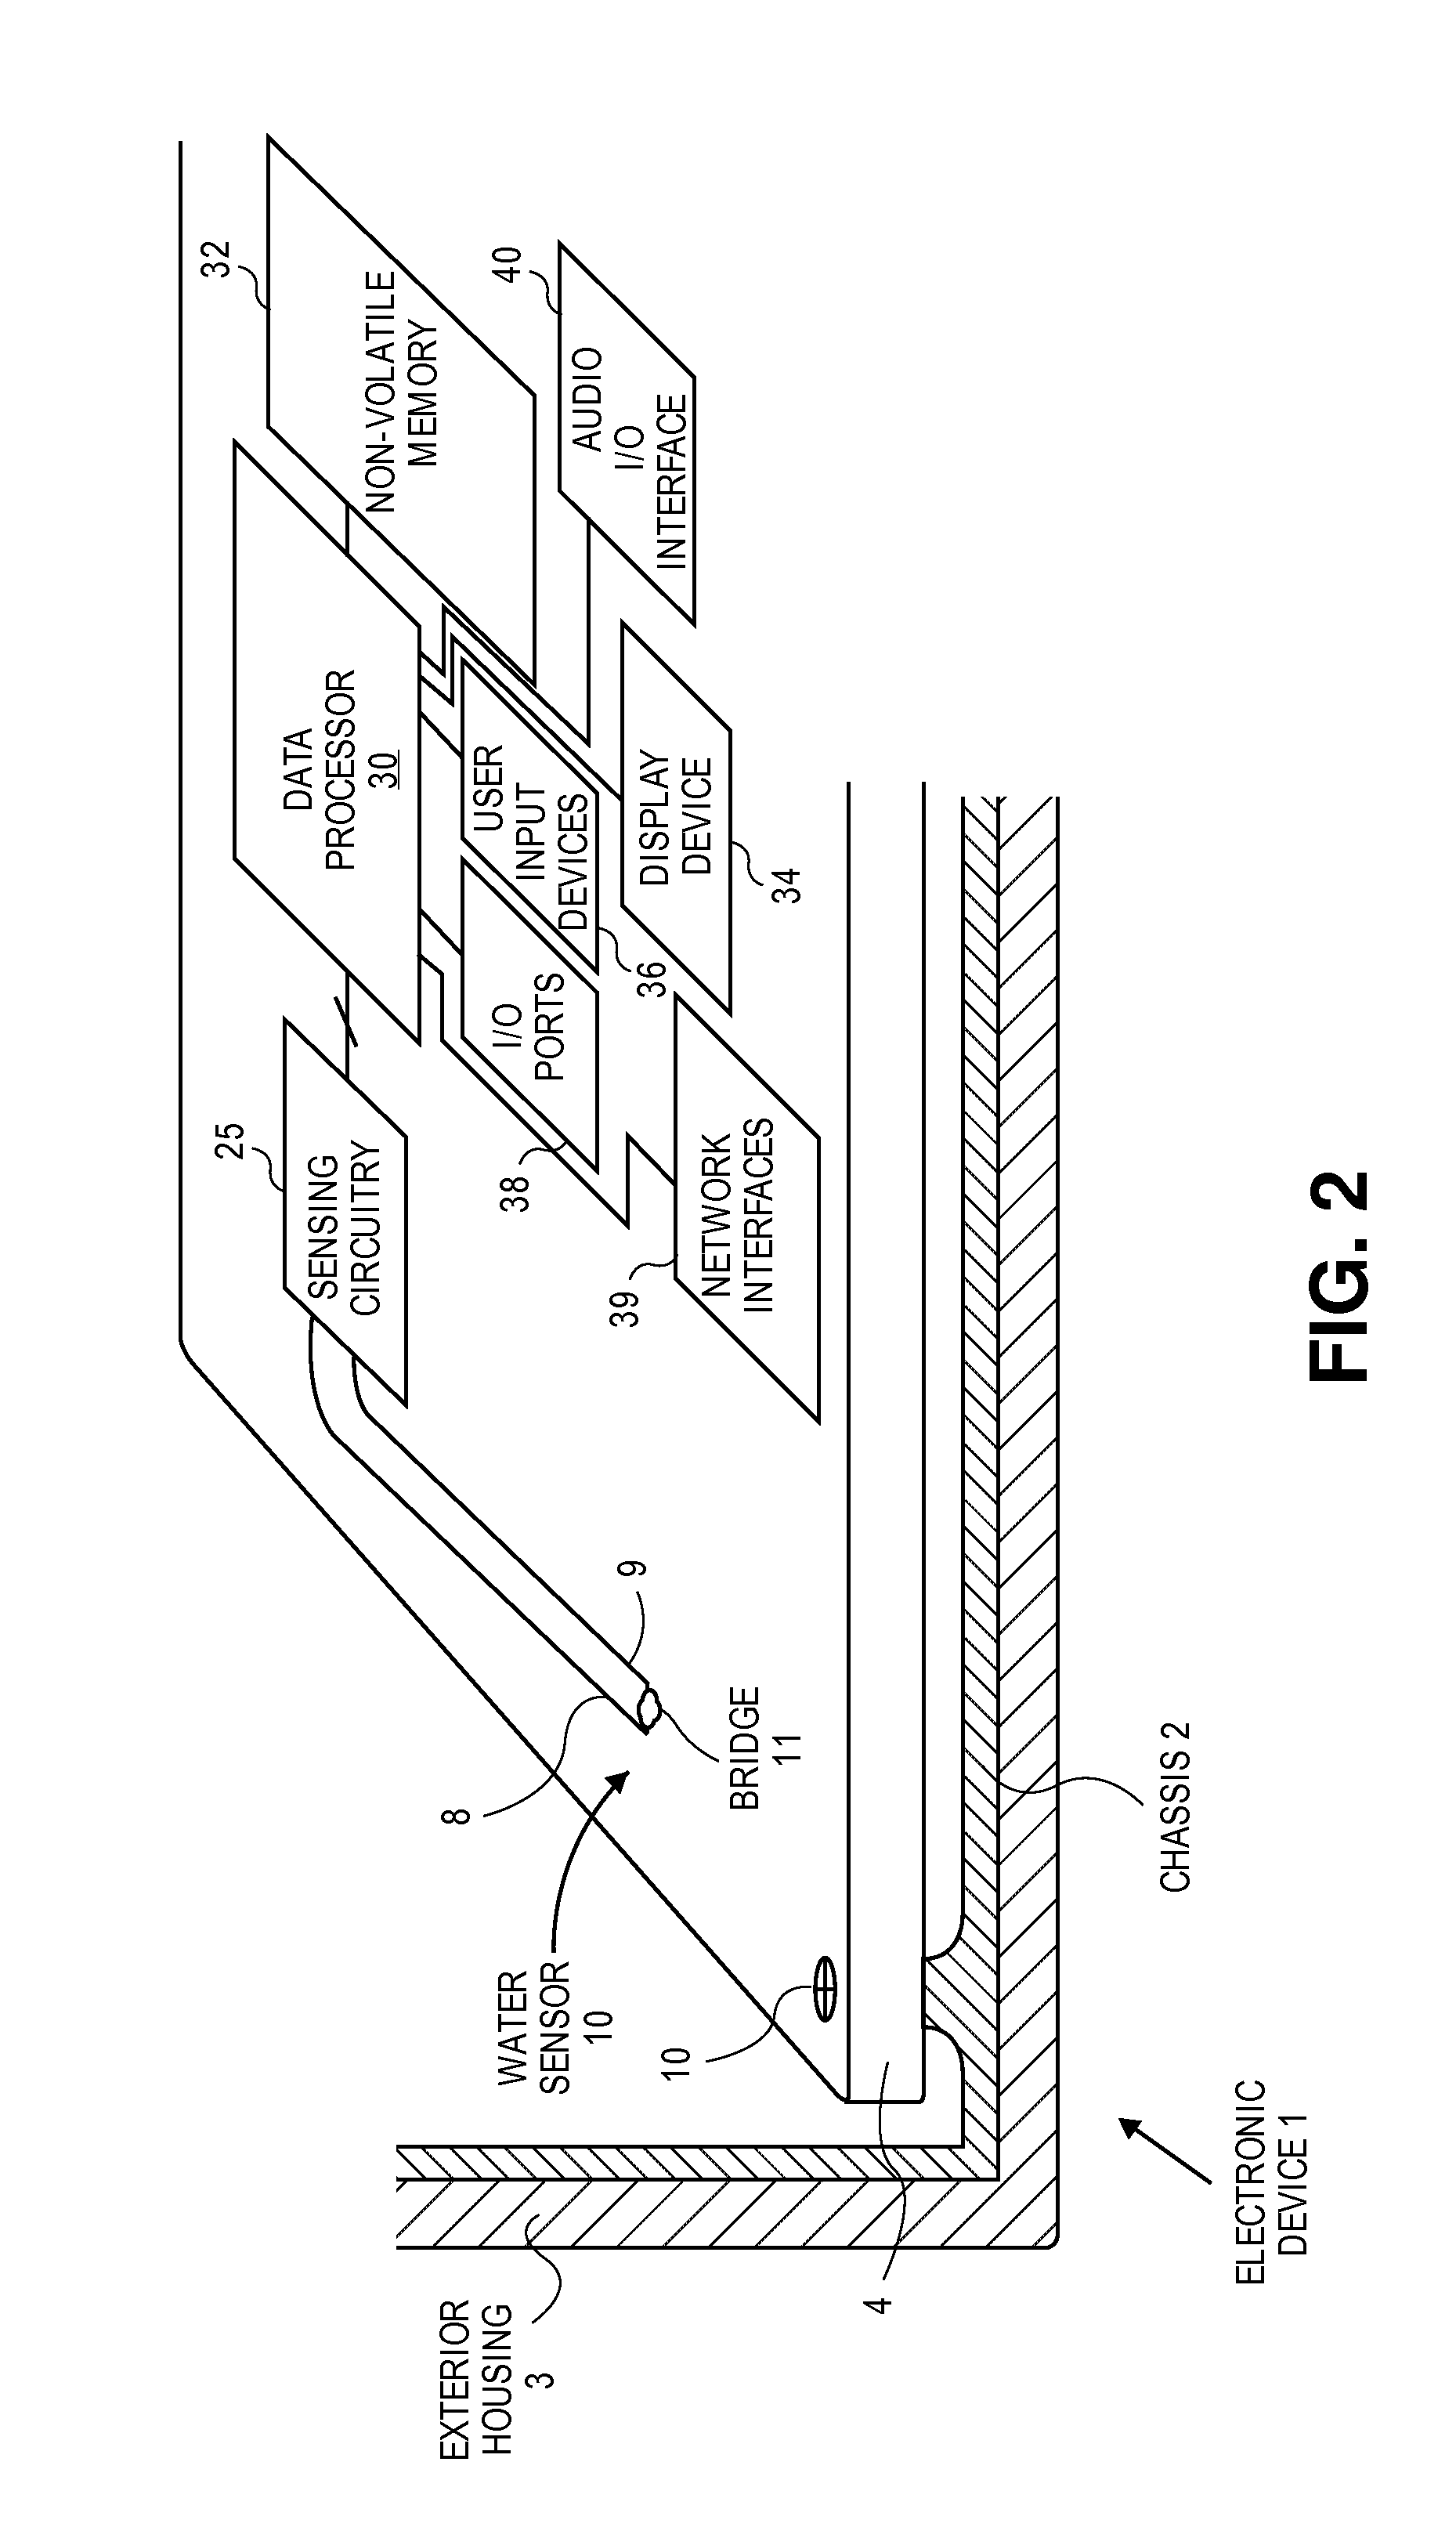 Mechanisms for detecting exposure to water in an electronic device